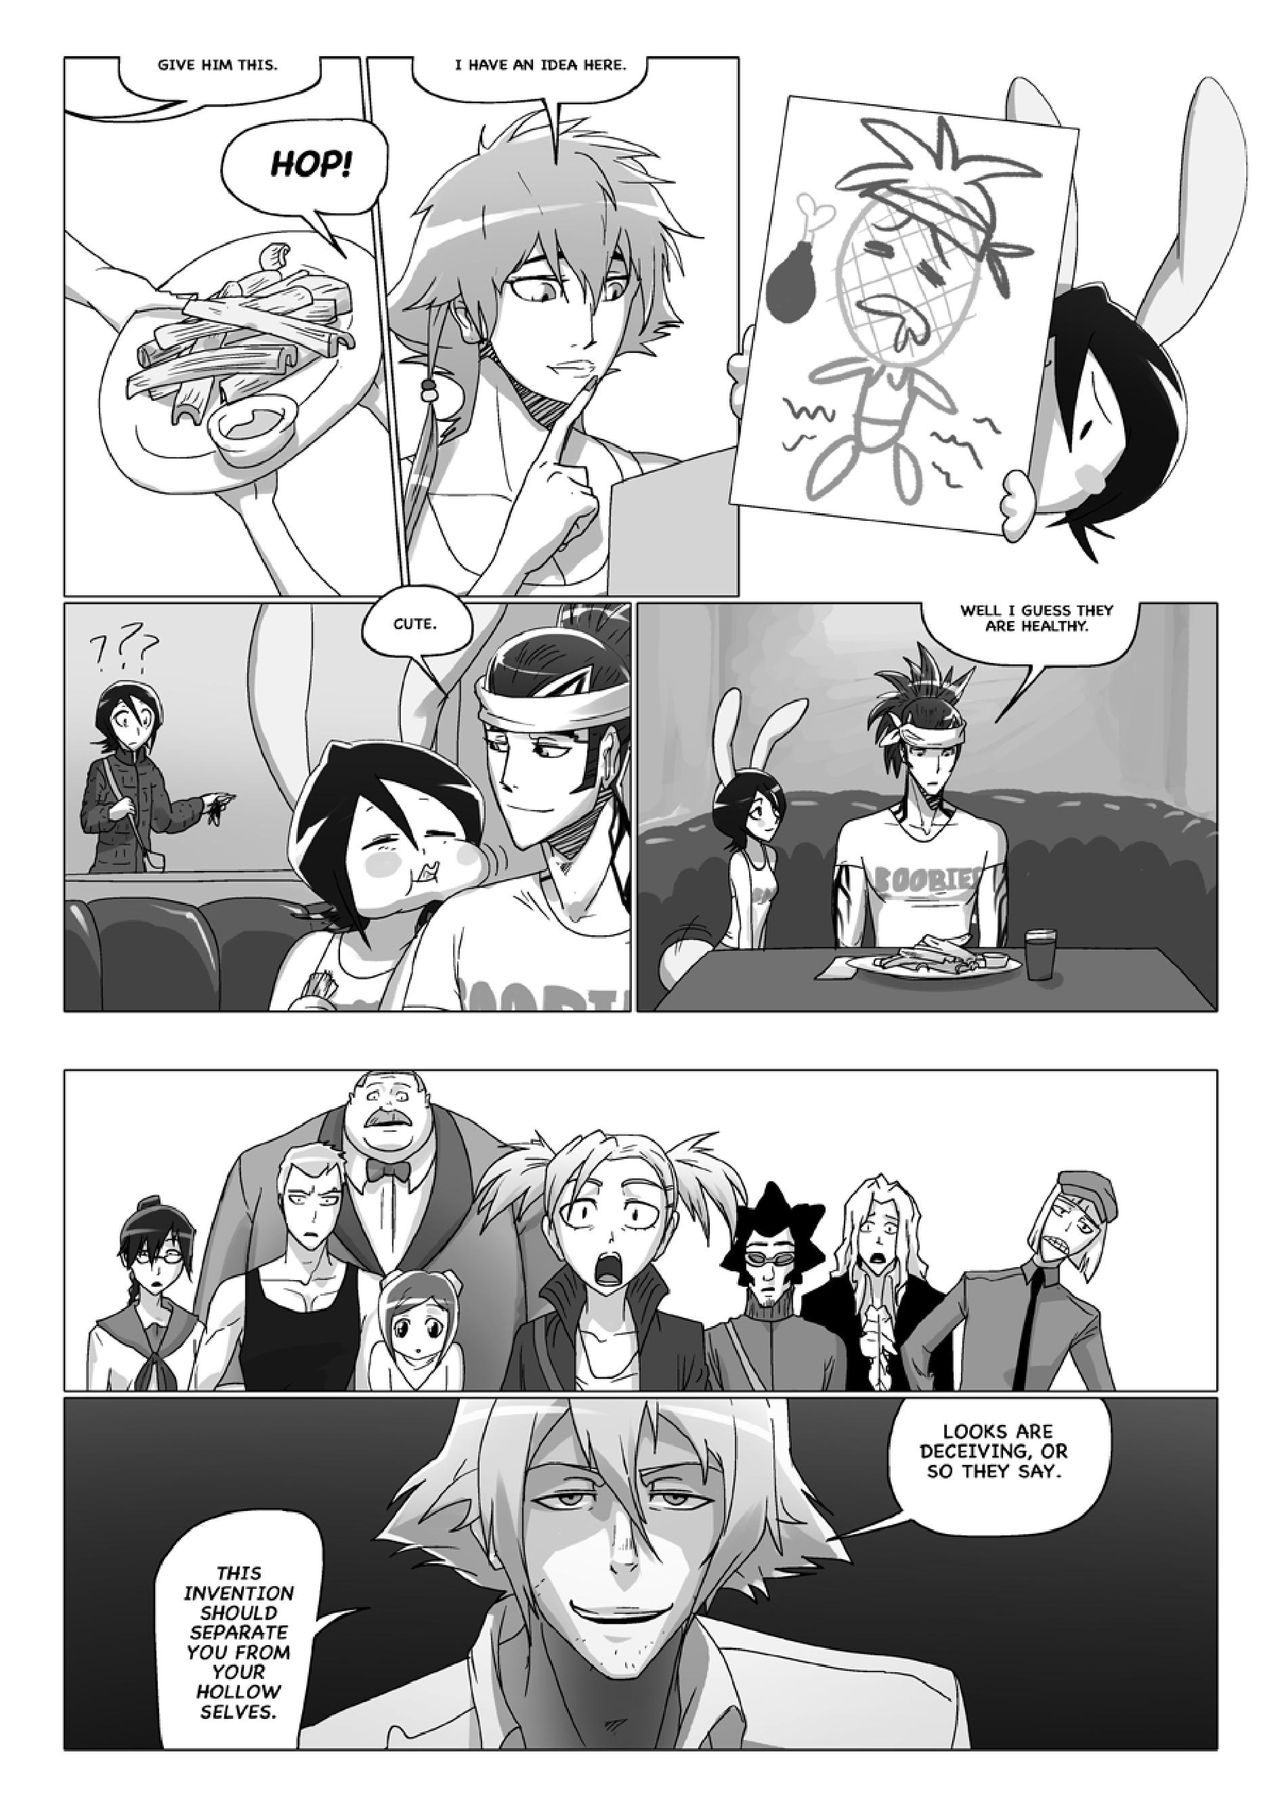 [Gairon] Happy to Serve You - Chapter 9 (Bleach) 14